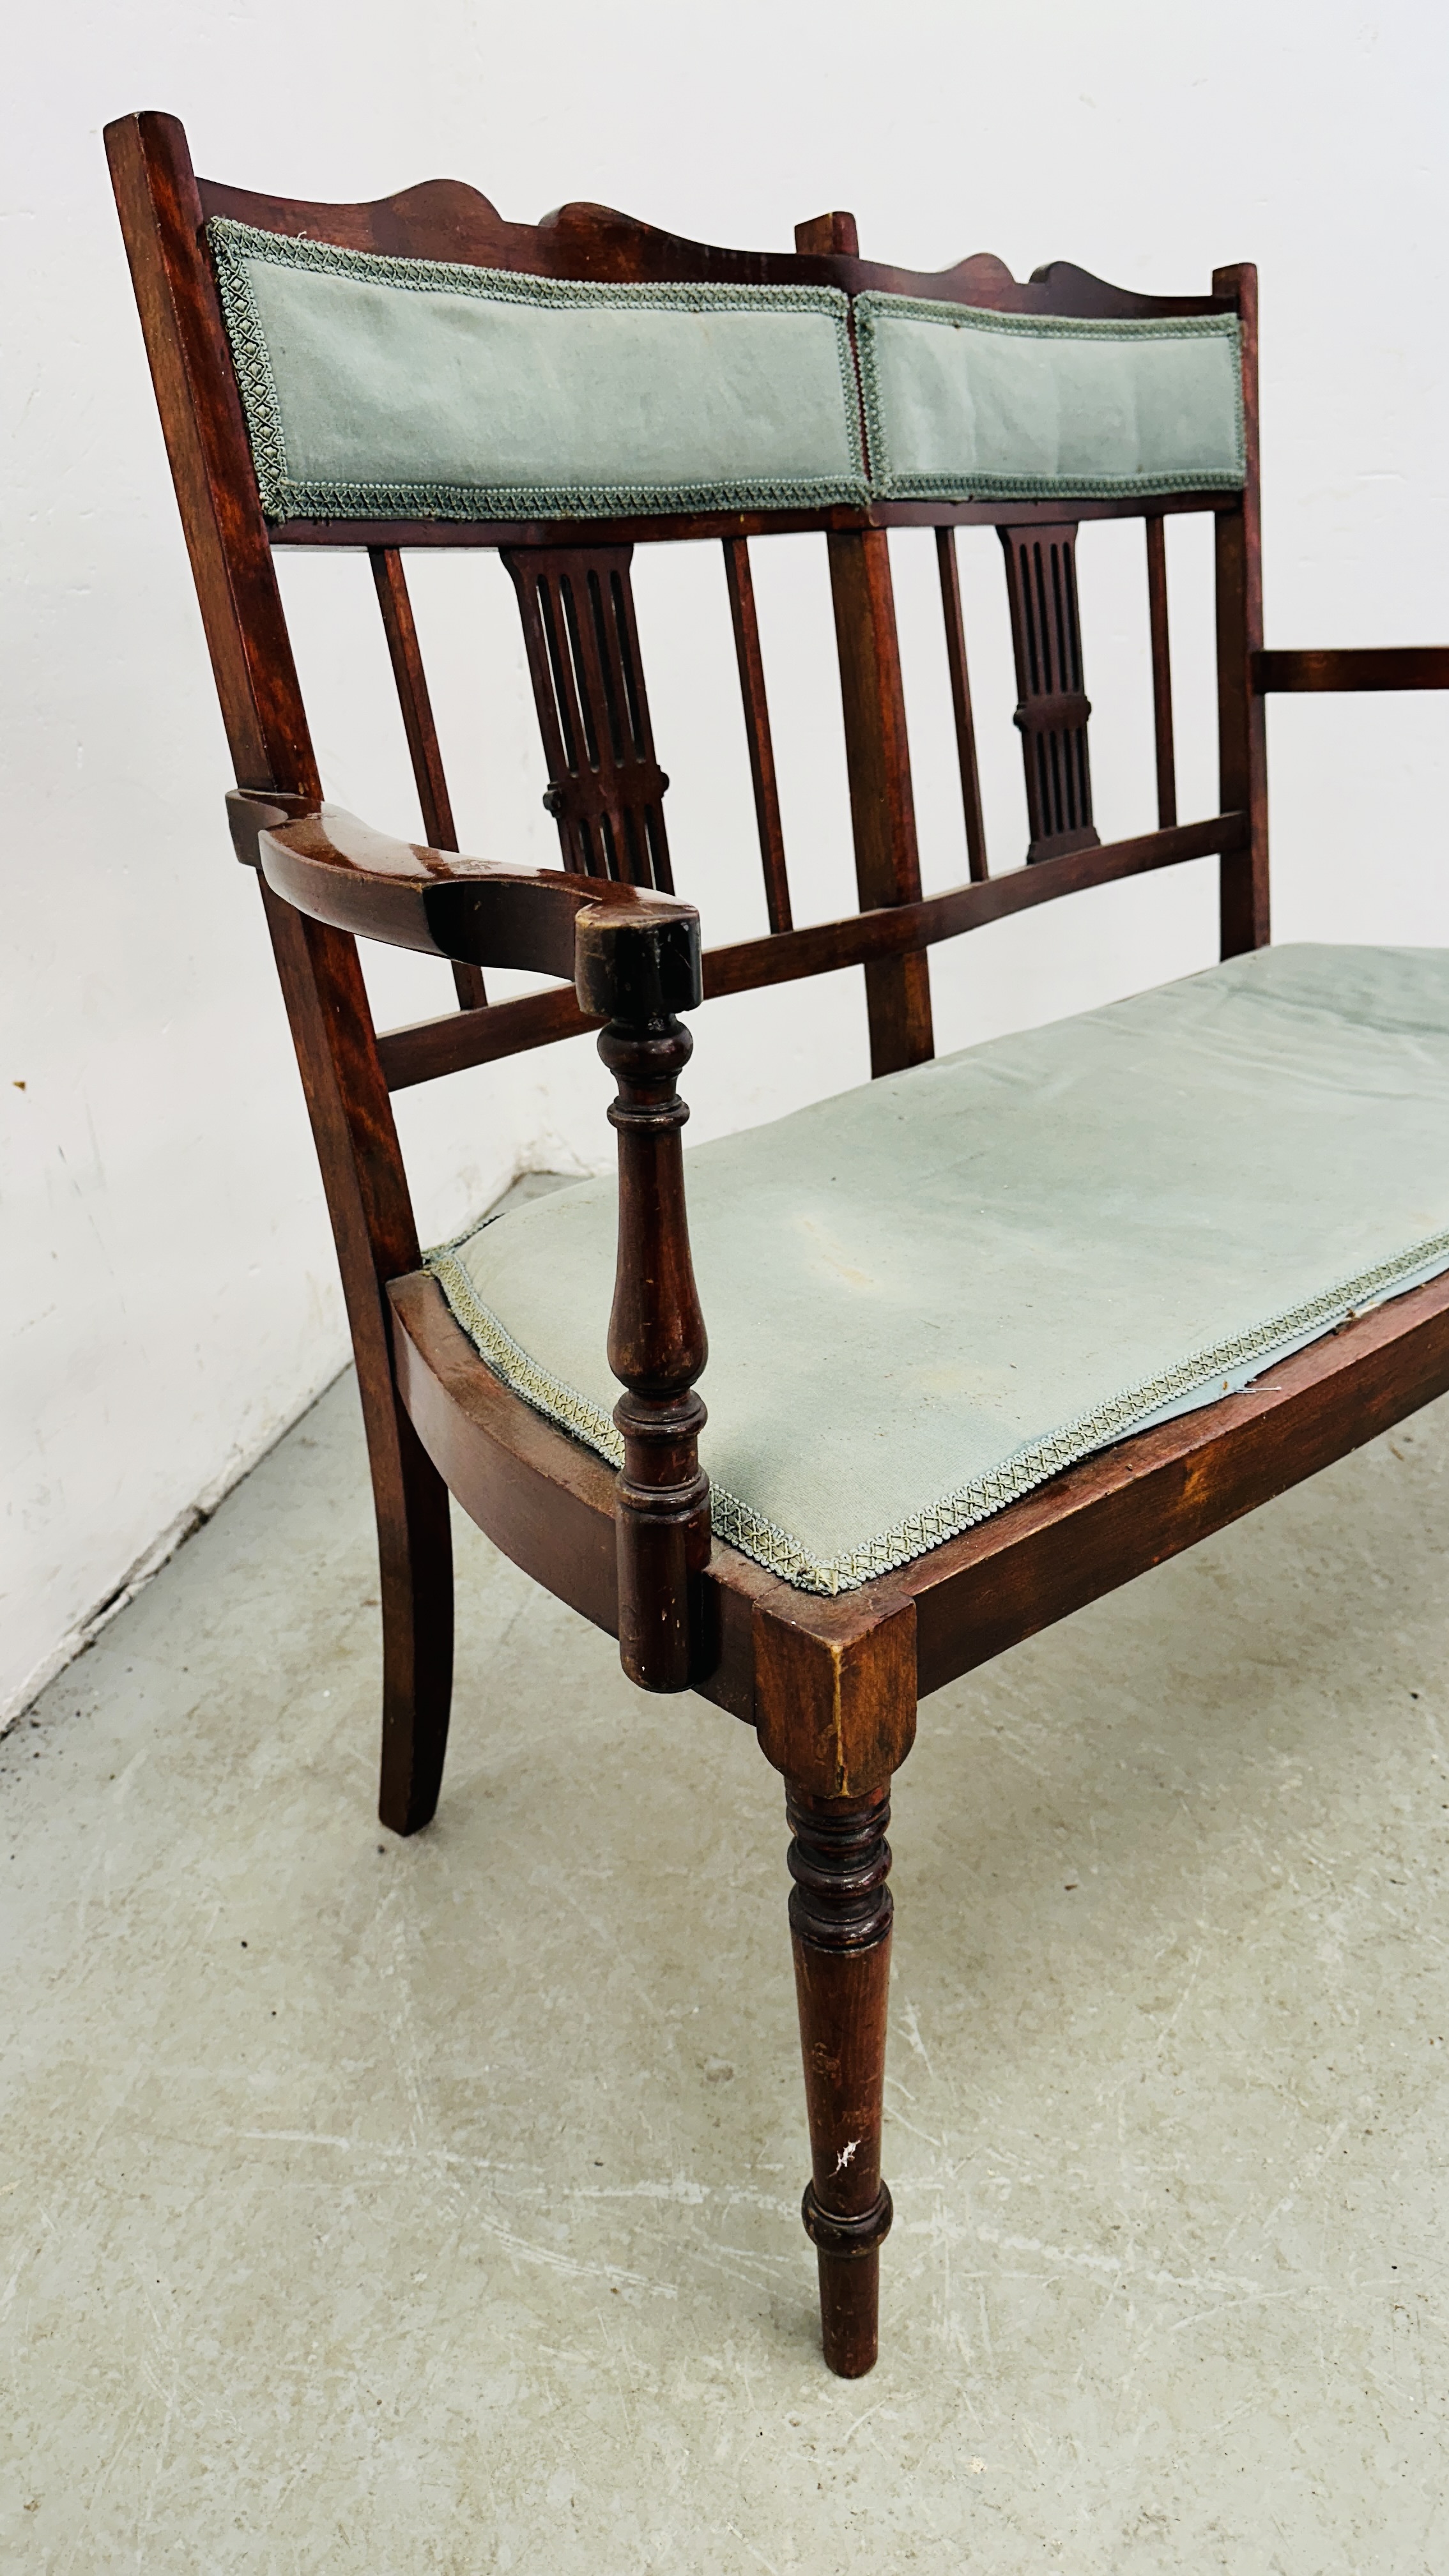 EDWARDIAN MAHOGANY 2 SEAT SOFA WITH FRETT WORK SUPPORT BACK AND GREEN UPHOLSTERY. - Image 9 of 11